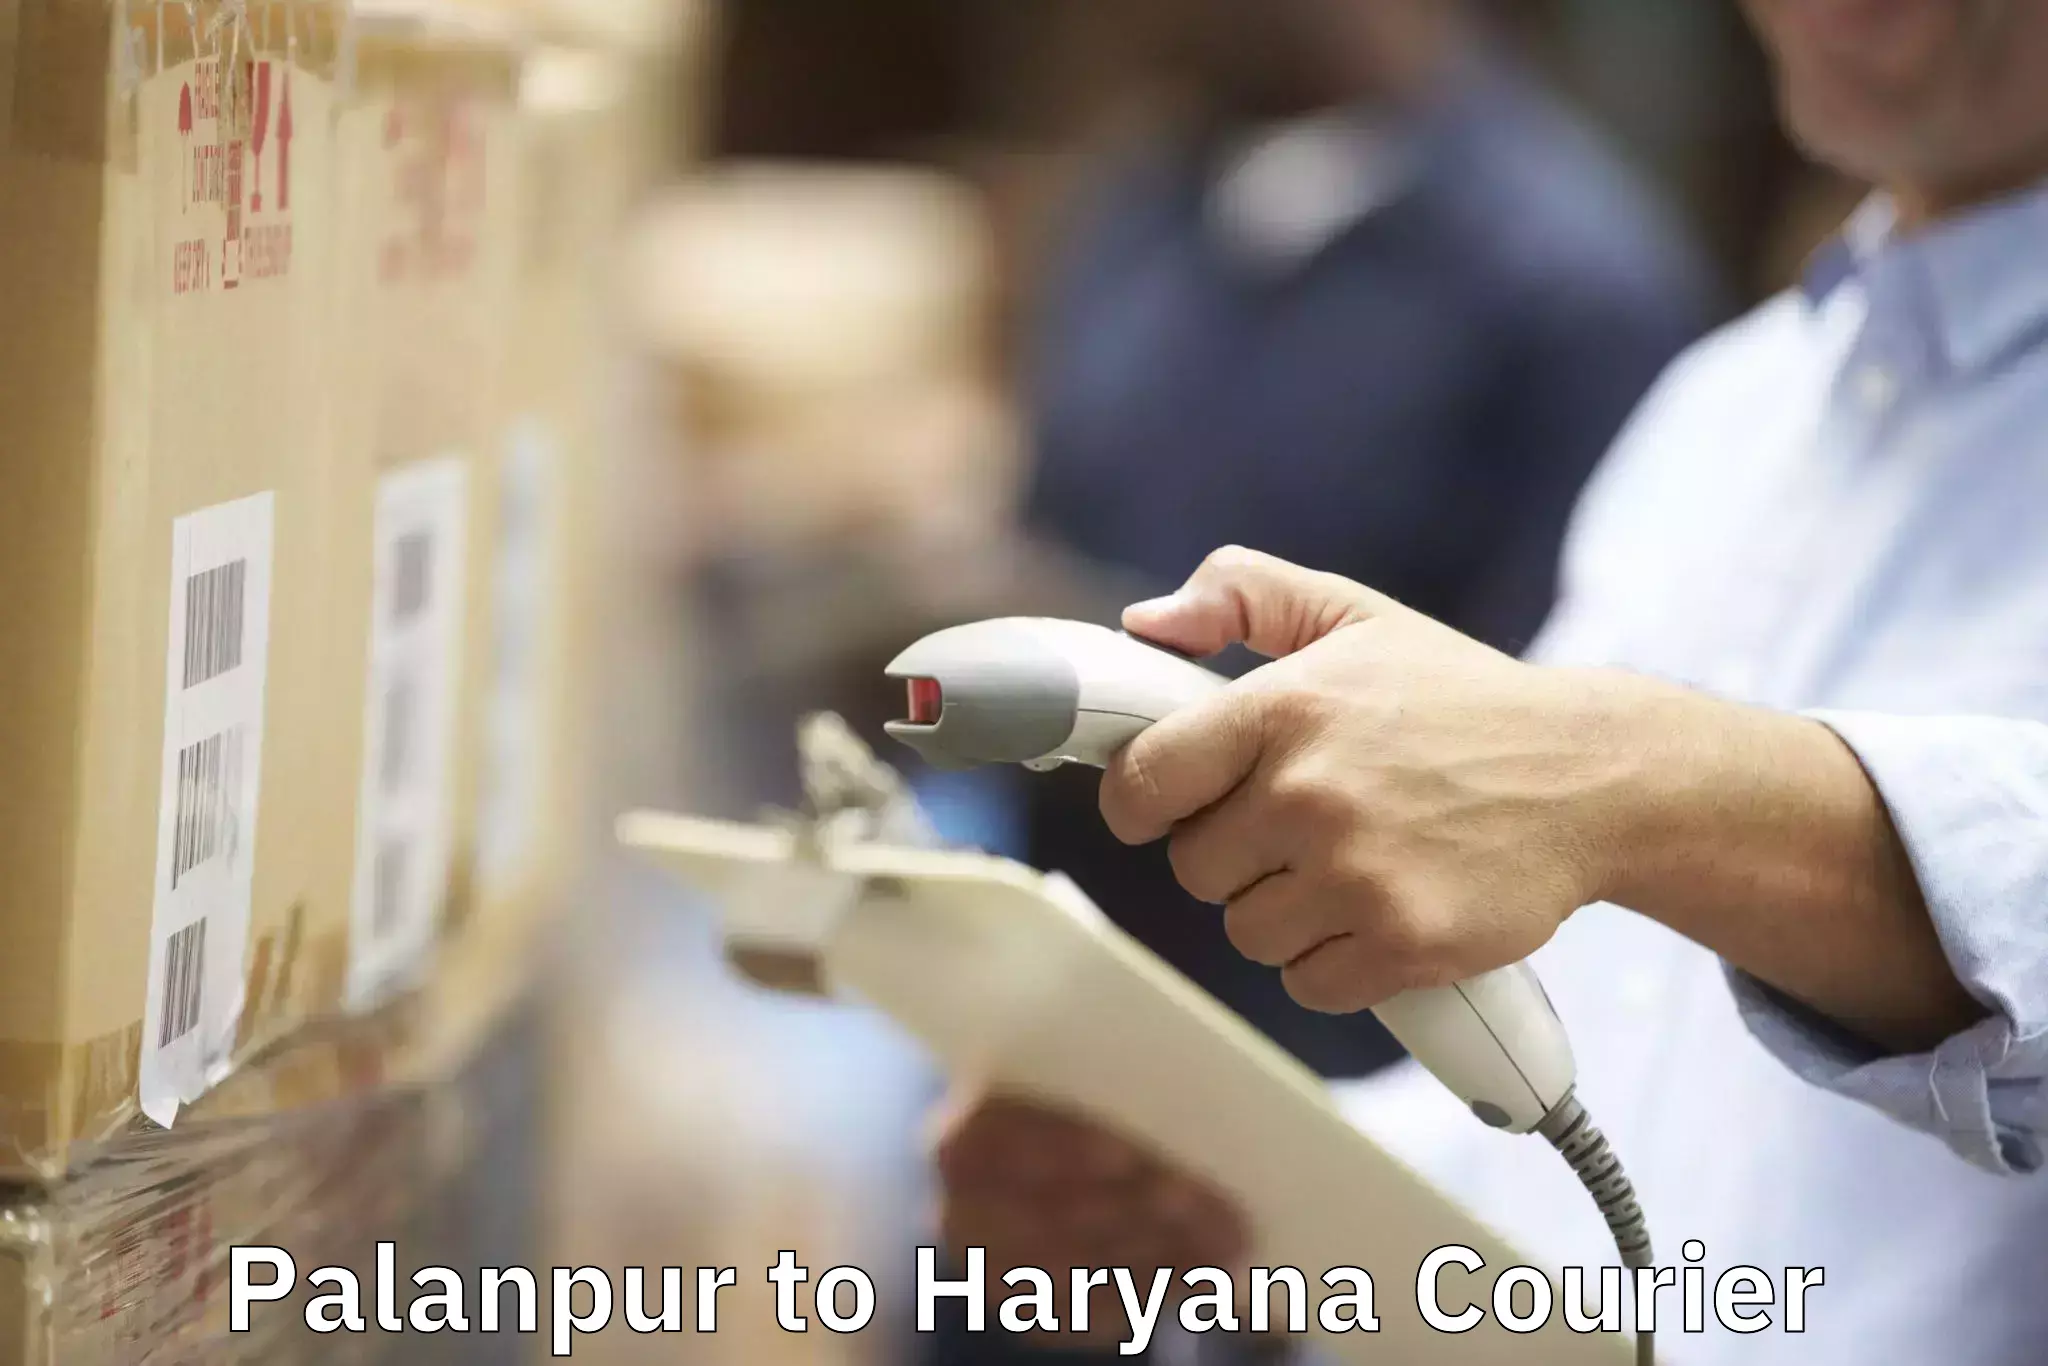 Furniture delivery service Palanpur to Haryana